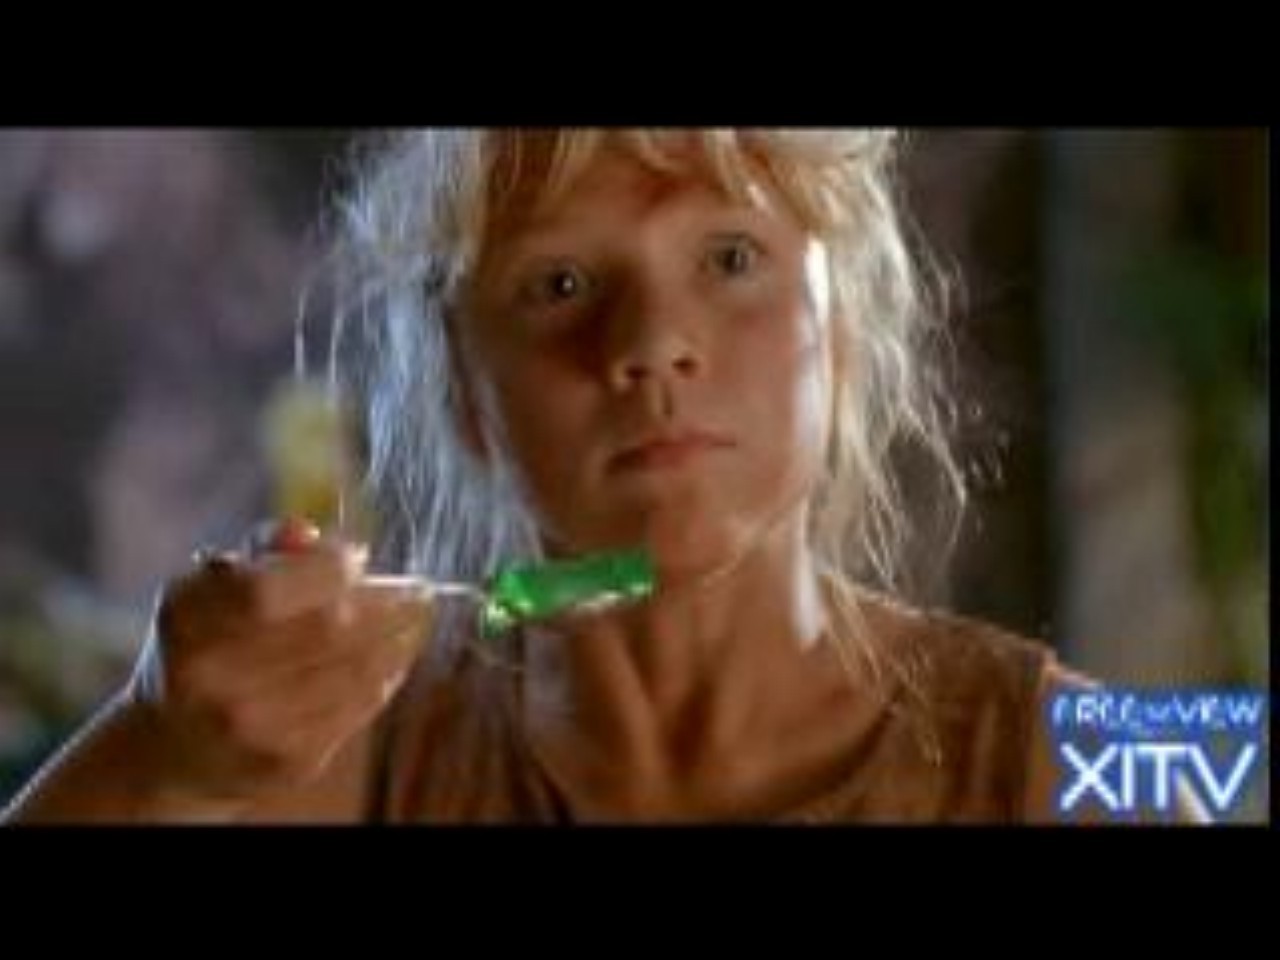 Free Movies Show List #1 Featuring JURASSIC PARK Starring Laura Dern! Watch Many More Great Films On XITV FREE <> VIEW™